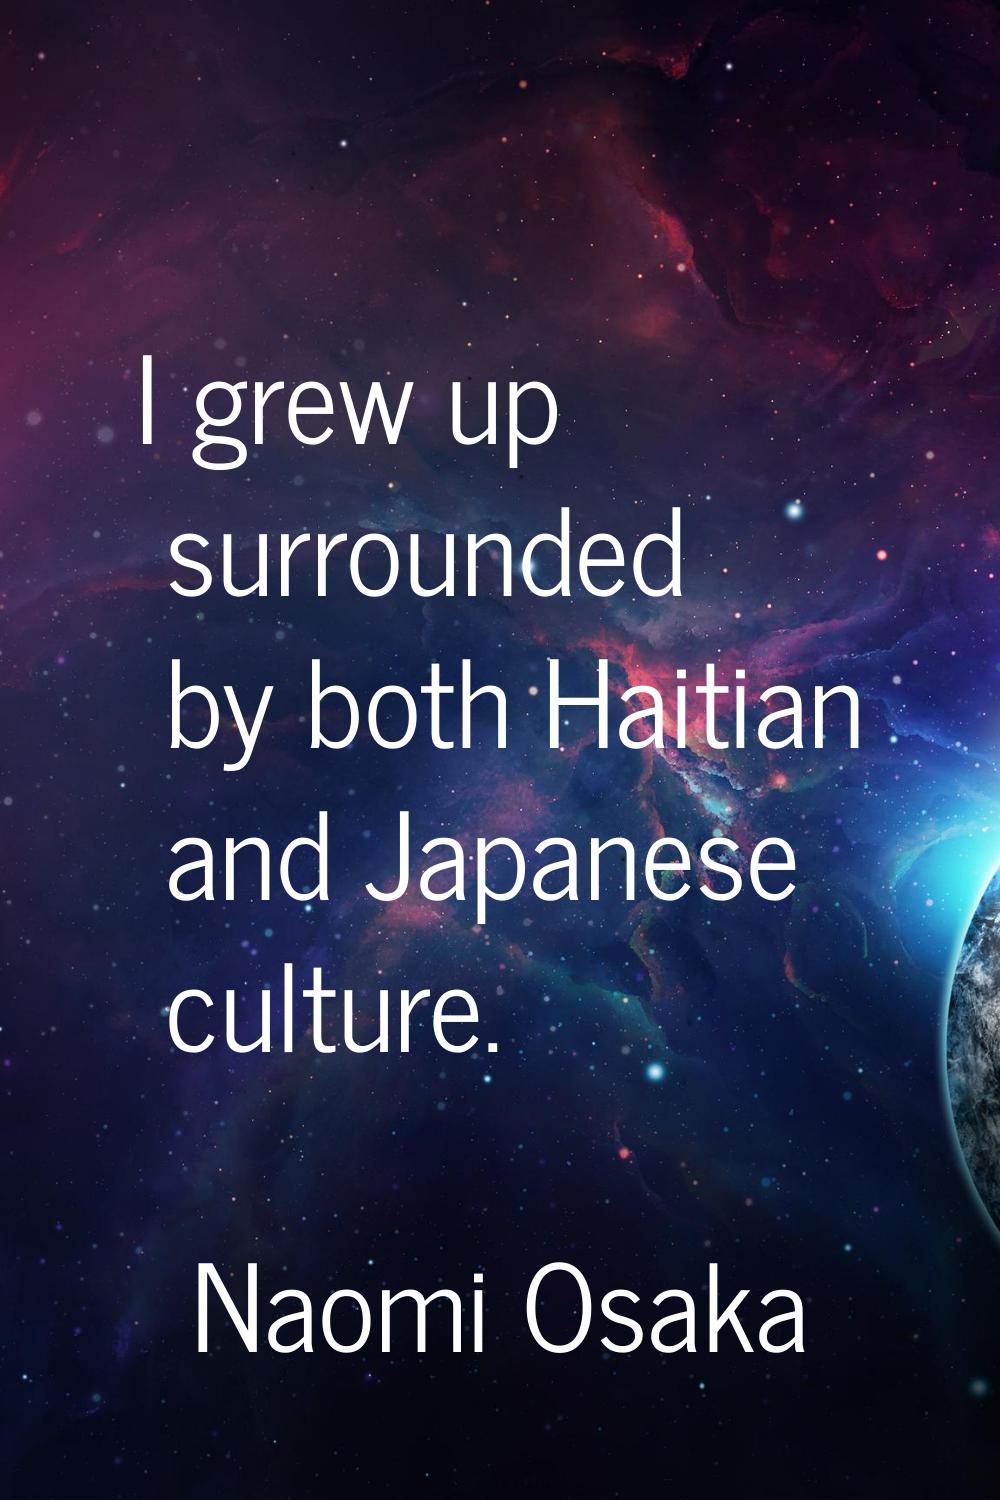 I grew up surrounded by both Haitian and Japanese culture.